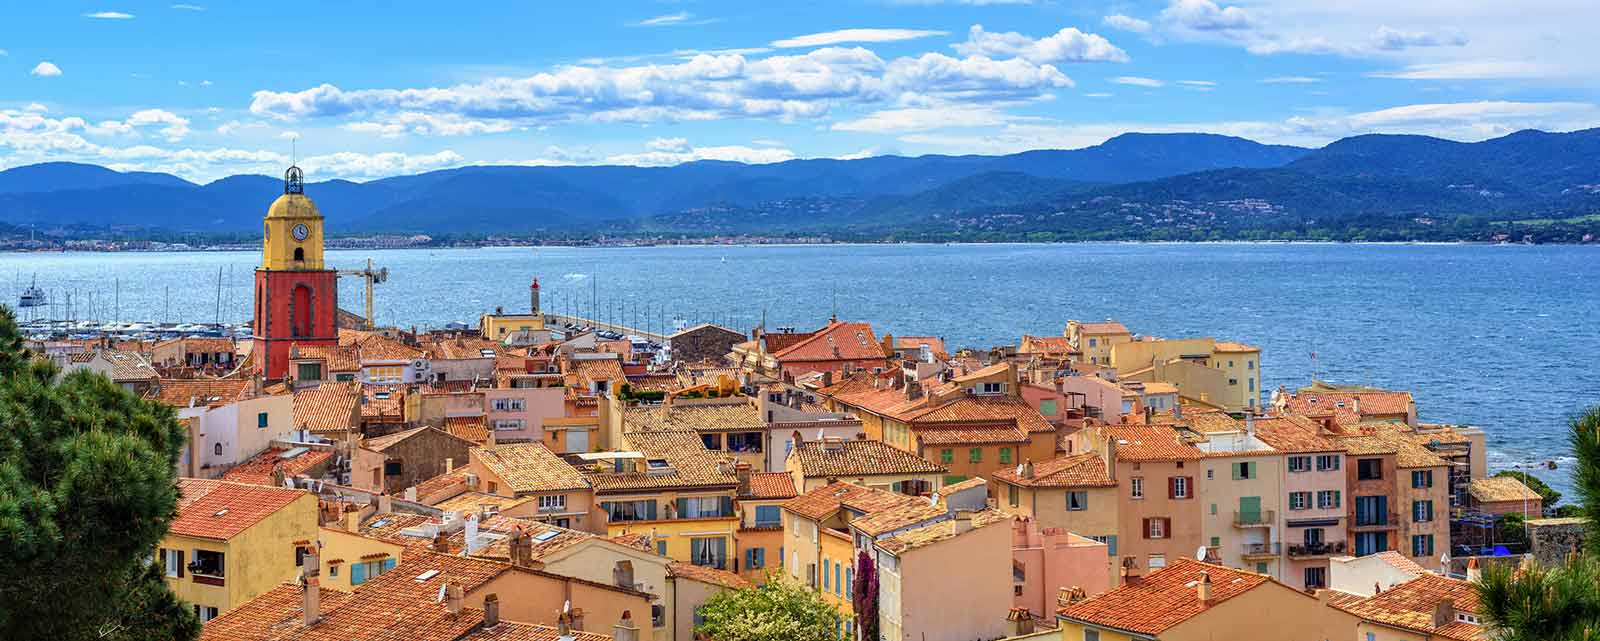 Visit Saint-Tropez, luxury holidays in the heart of the French Riviera with In Luxe Travel France.